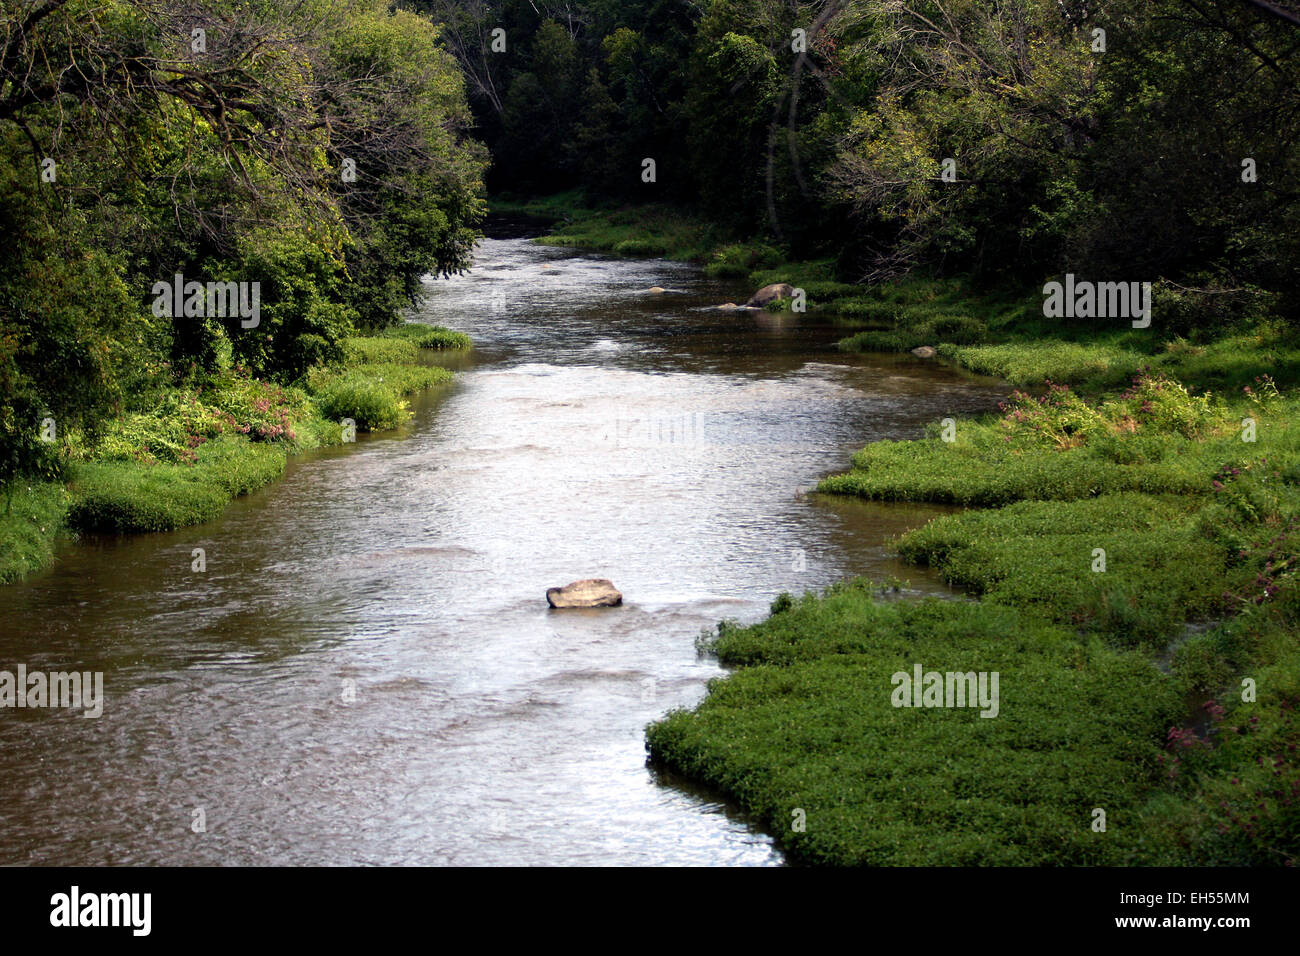 Cass River, Tuscola County, Michigan in the Saginaw Bay Watershed Stock Photo